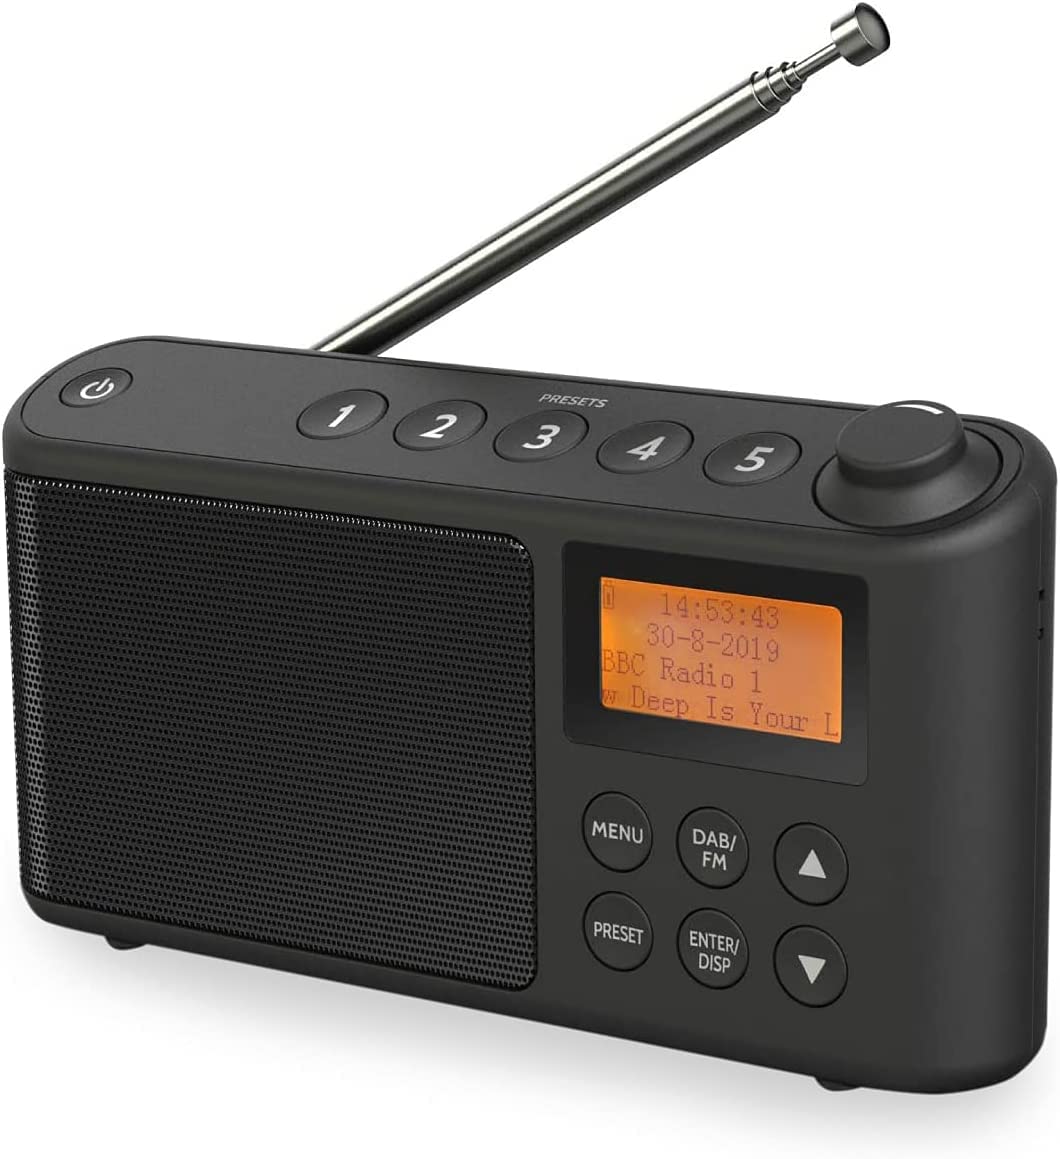 DAB/DAB+ & FM Radio, Mains and Battery Powered Portable DAB Radios Rechargeable Digital Radio with USB Charging for 15 Hours Playback (Black)